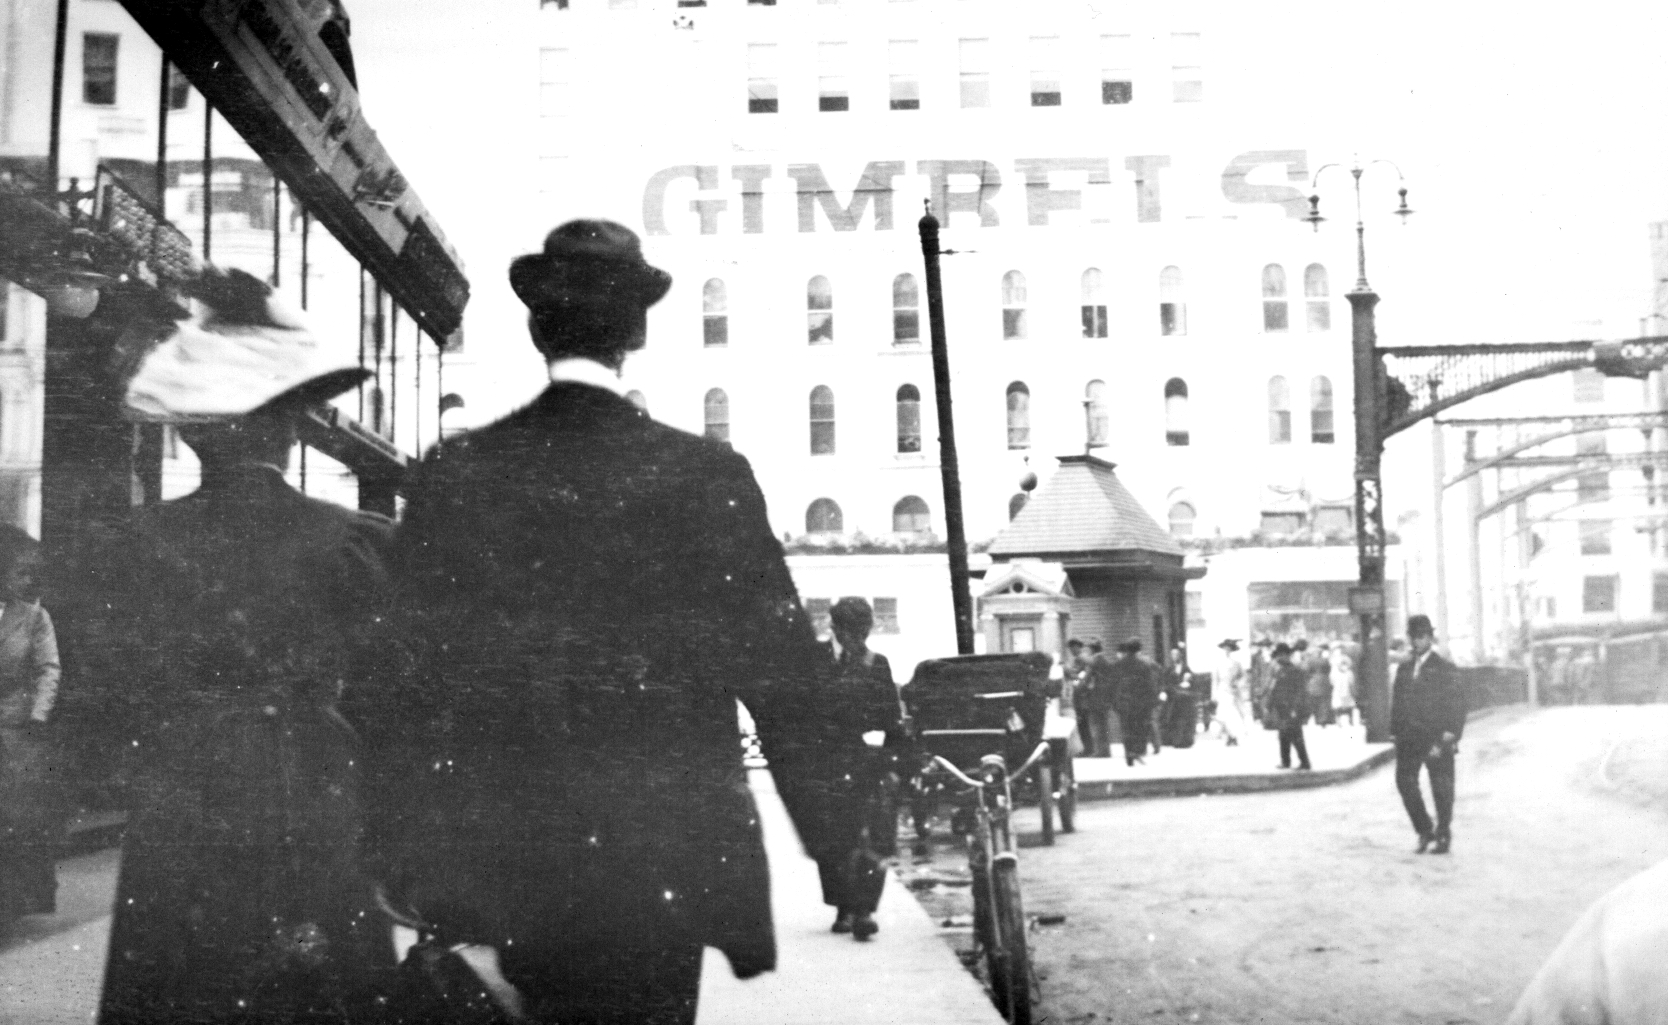 Two people walk west on Wisconsin Avenue in the early twentieth century towards the Gimbels Department Store.  Their dress suggests their gender identity as a woman [left] and a man [right].